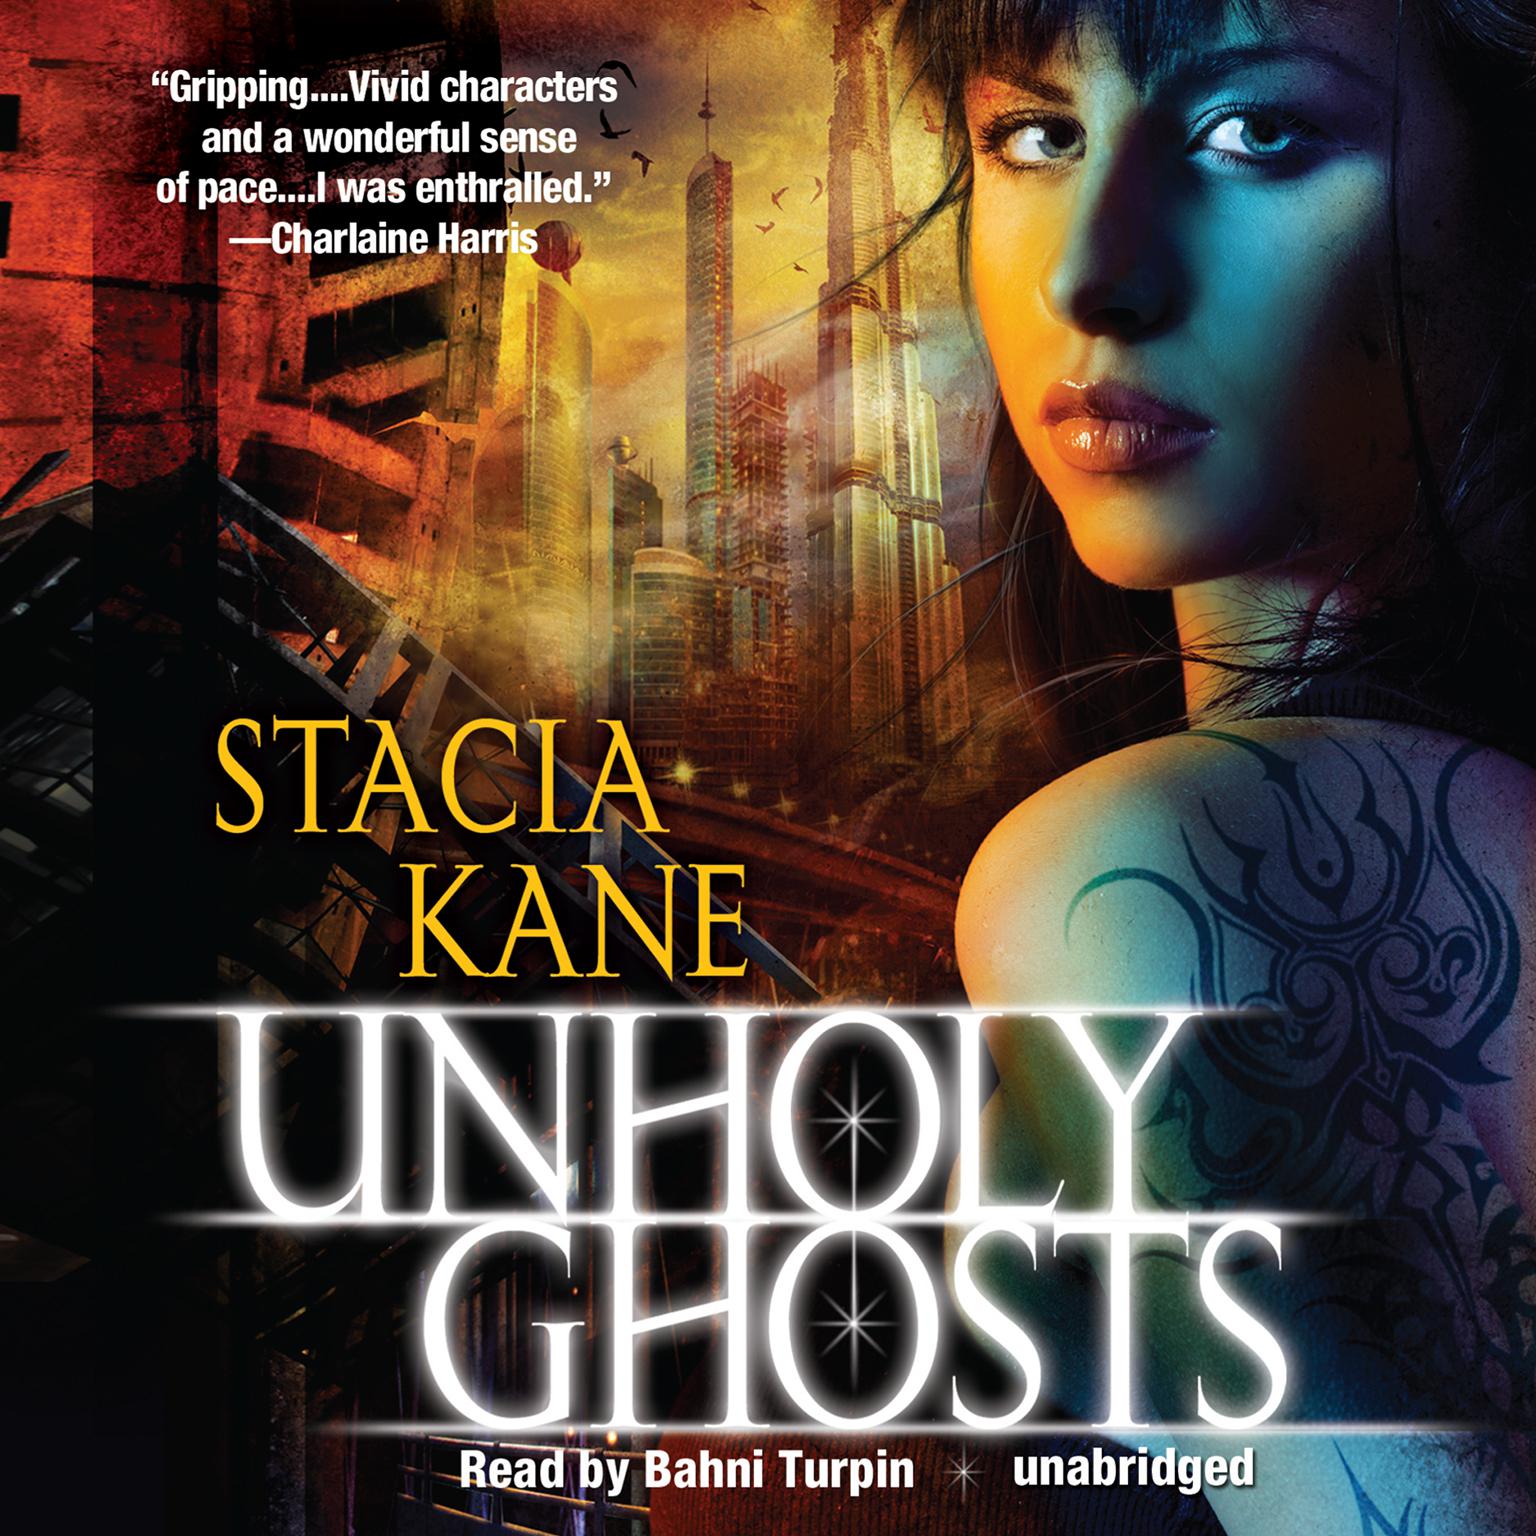 Unholy Ghosts Audiobook, by Stacia Kane